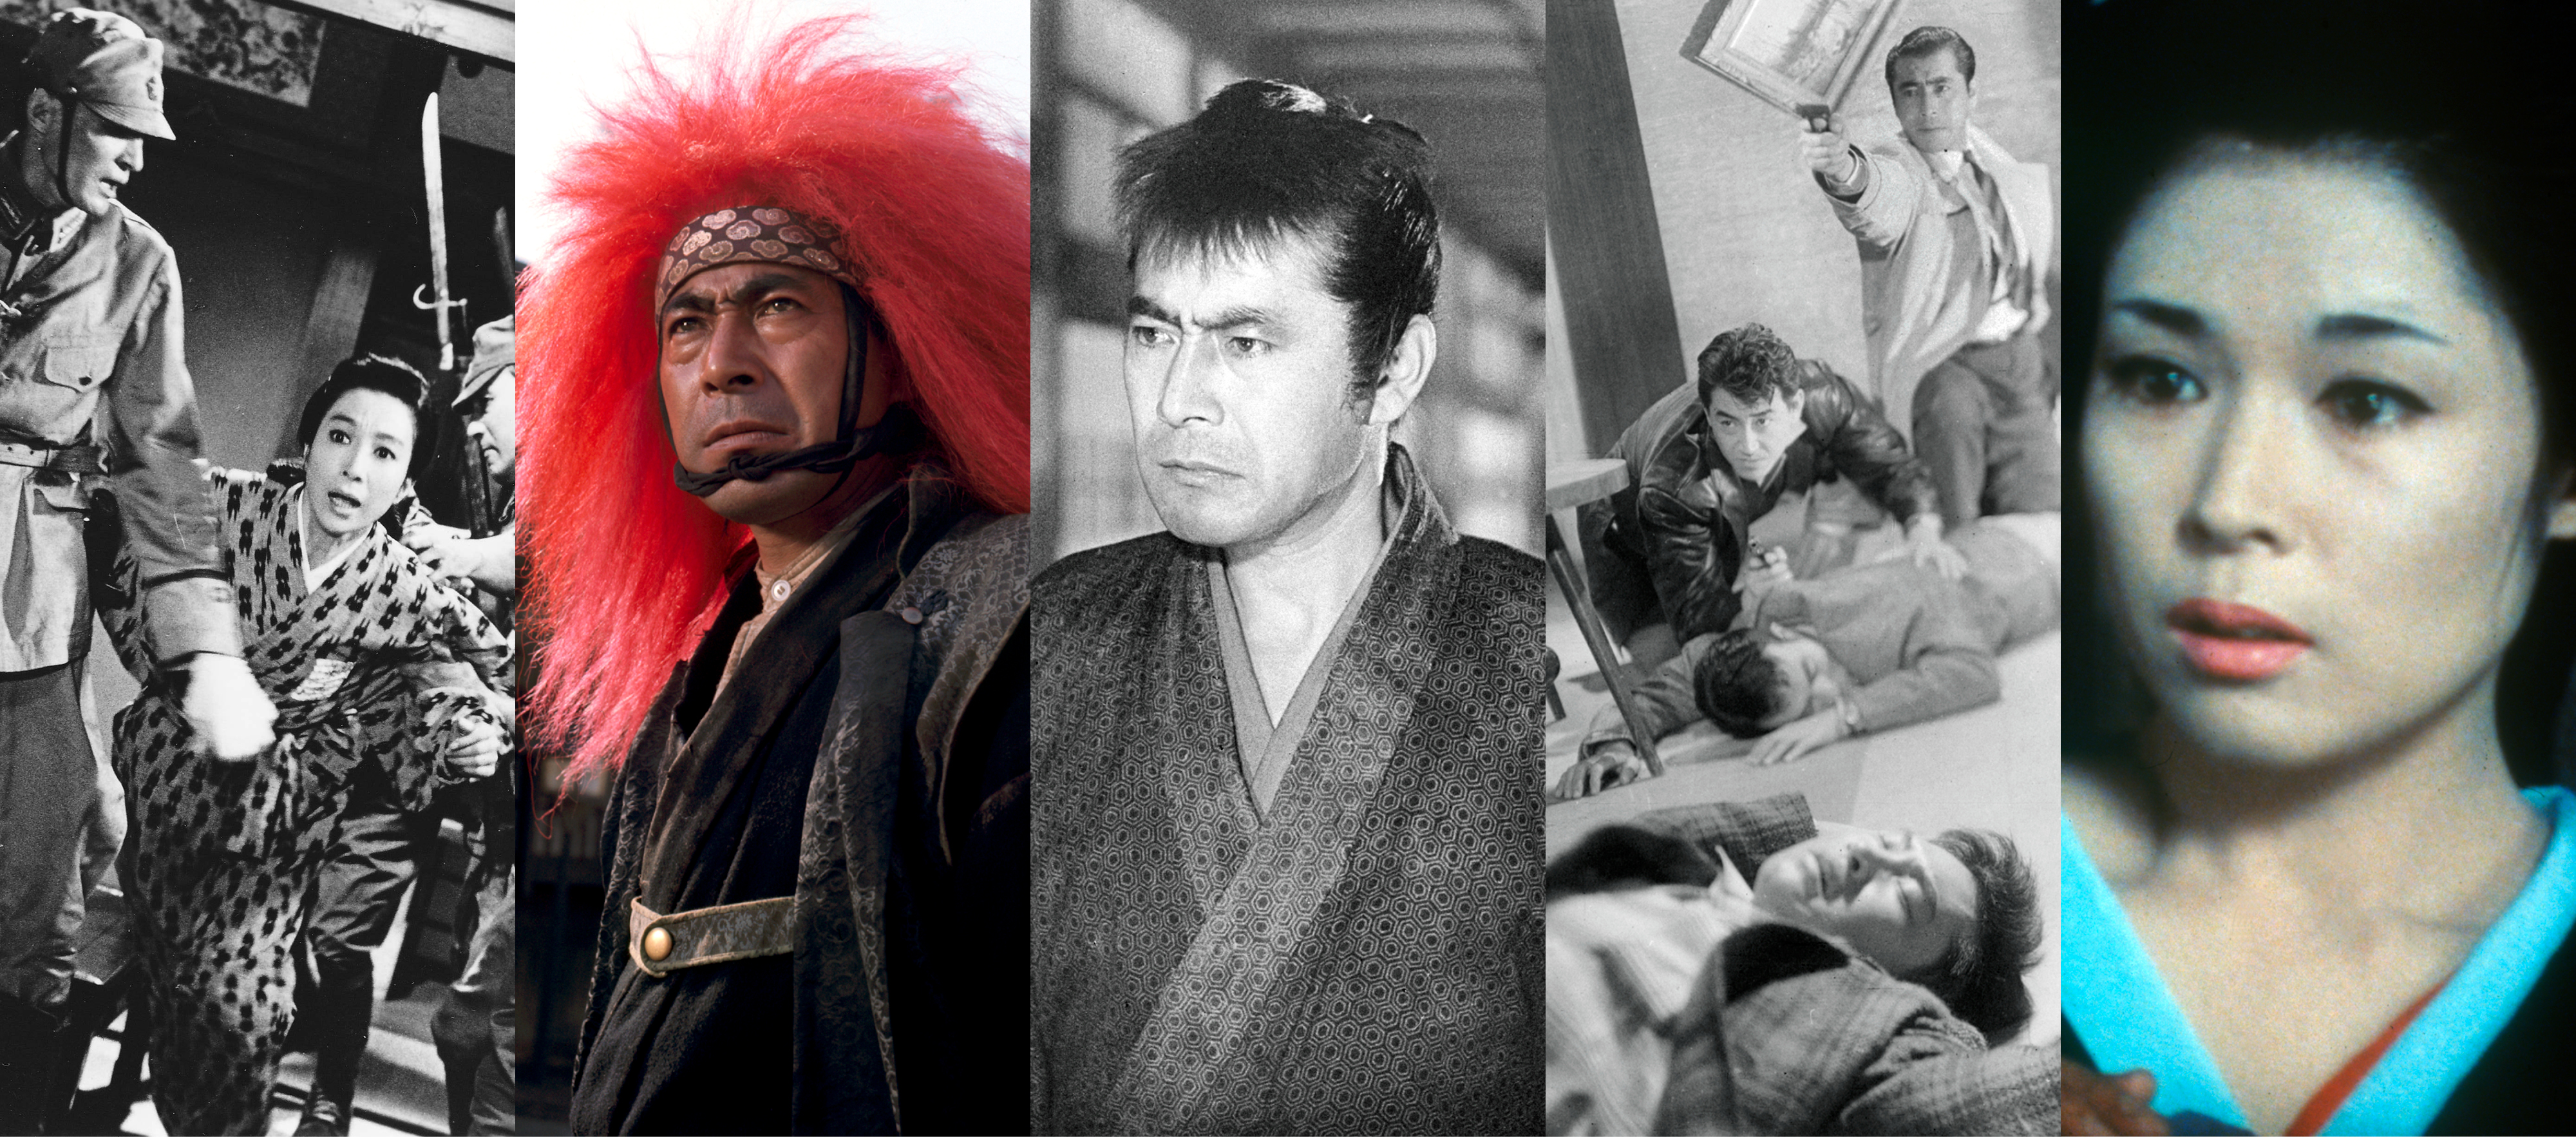 From left to right: black-and-white still of a person in a patterned kimono who is trying to flee from four soldiers with weapons; still of a person wearing a red lion’s mane; black-and-white still of a person with short, dark hair, pulling their eyebrows together in confusion; black-and-white still of a gunfight where two people are on the ground with guns pointed in front of them and two unconscious people are on the floor; still of a person with dark hair, pink lipstick, and a blue-lined kimono.